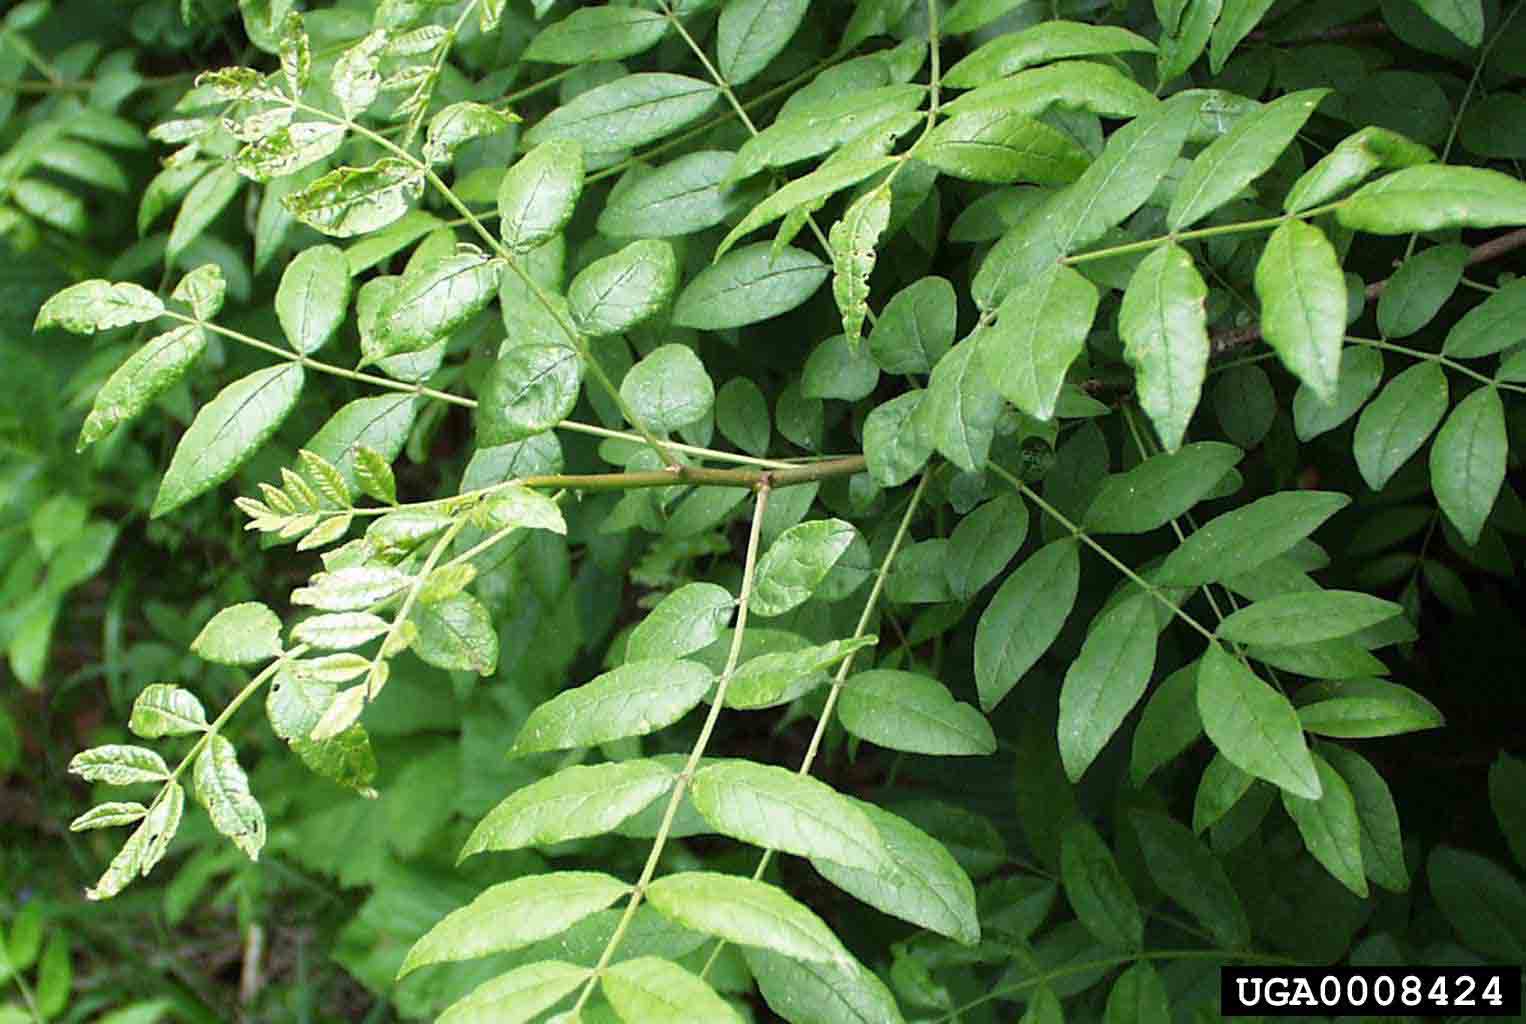 Toothache tree pinnately compound leaves, alternately arranged